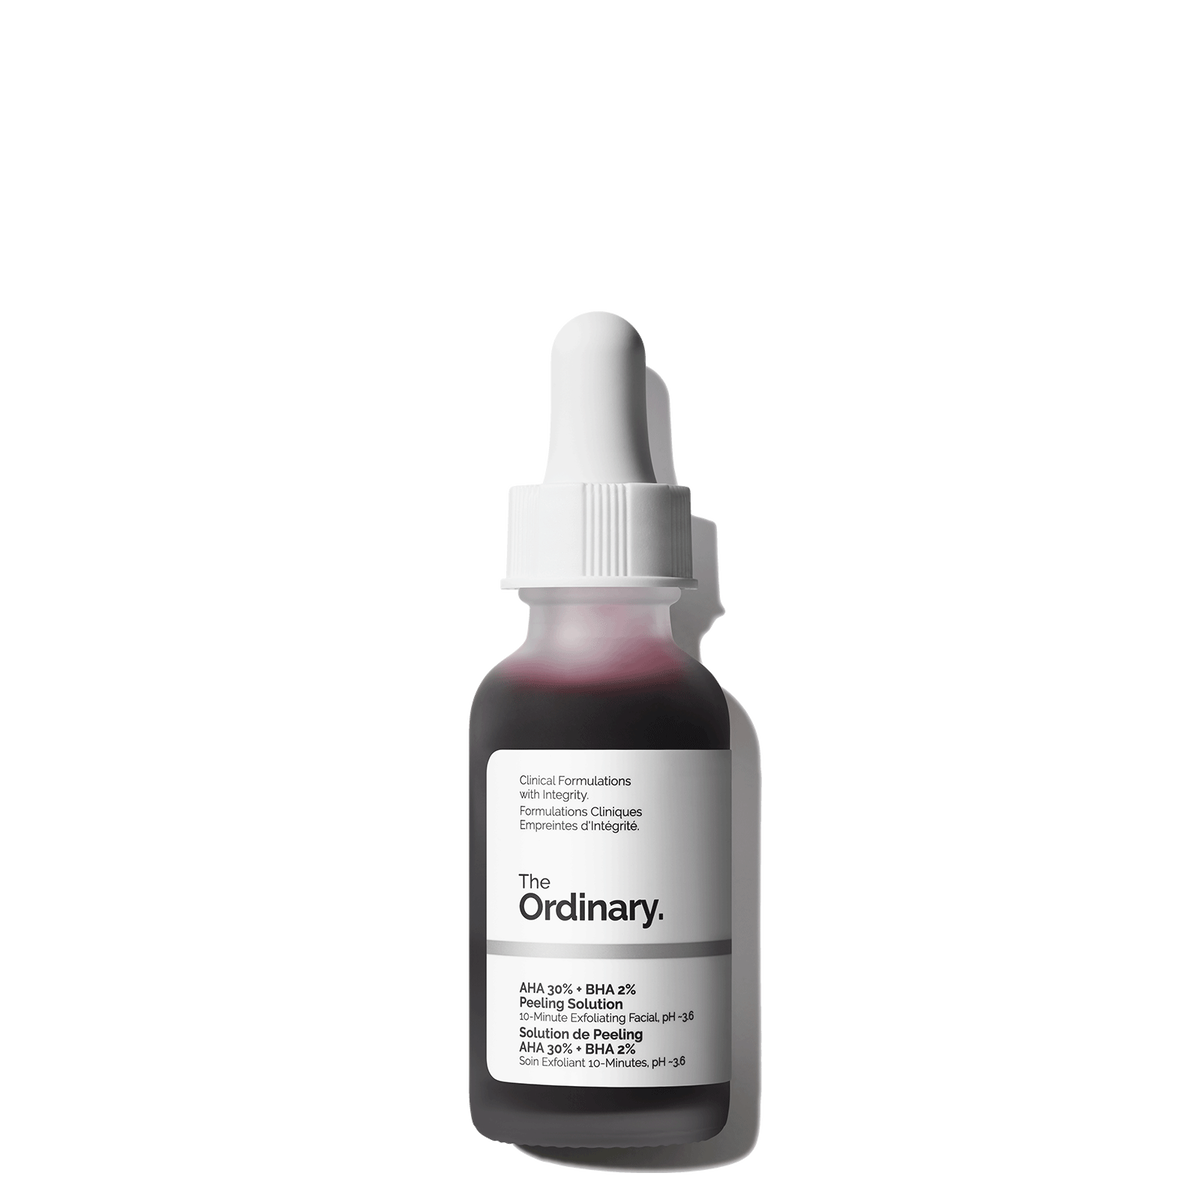 The Ordinary AHA 30% + BHA 2% Peeling Solution bottle front view